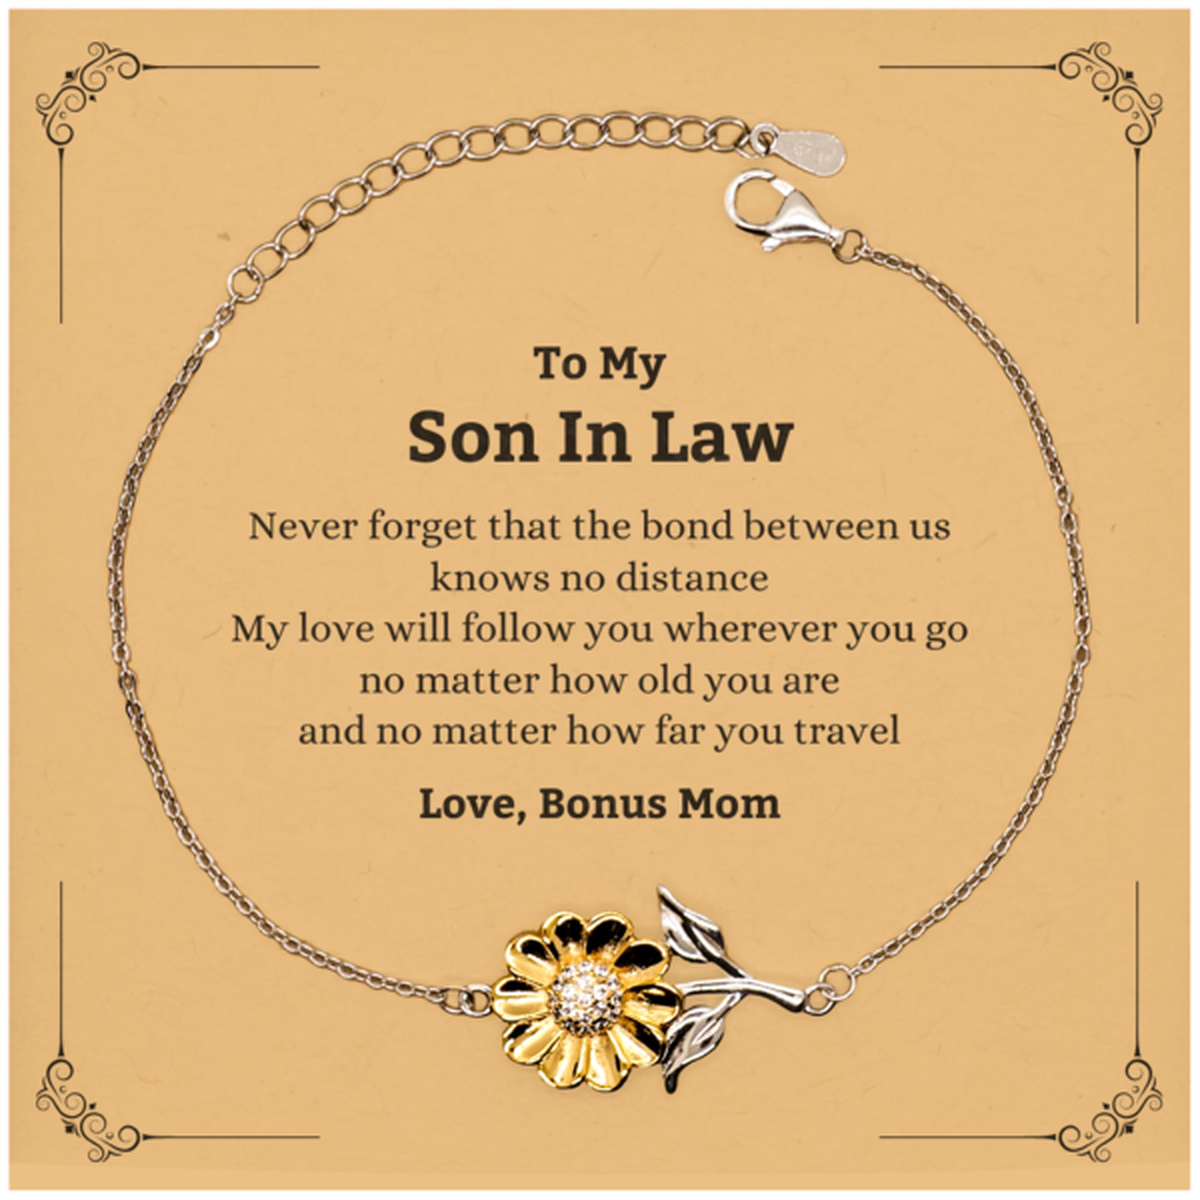 Son In Law Birthday Gifts from Bonus Mom, Adjustable Sunflower Bracelet for Son In Law Christmas Graduation Unique Gifts Son In Law Never forget that the bond between us knows no distance. Love, Bonus Mom